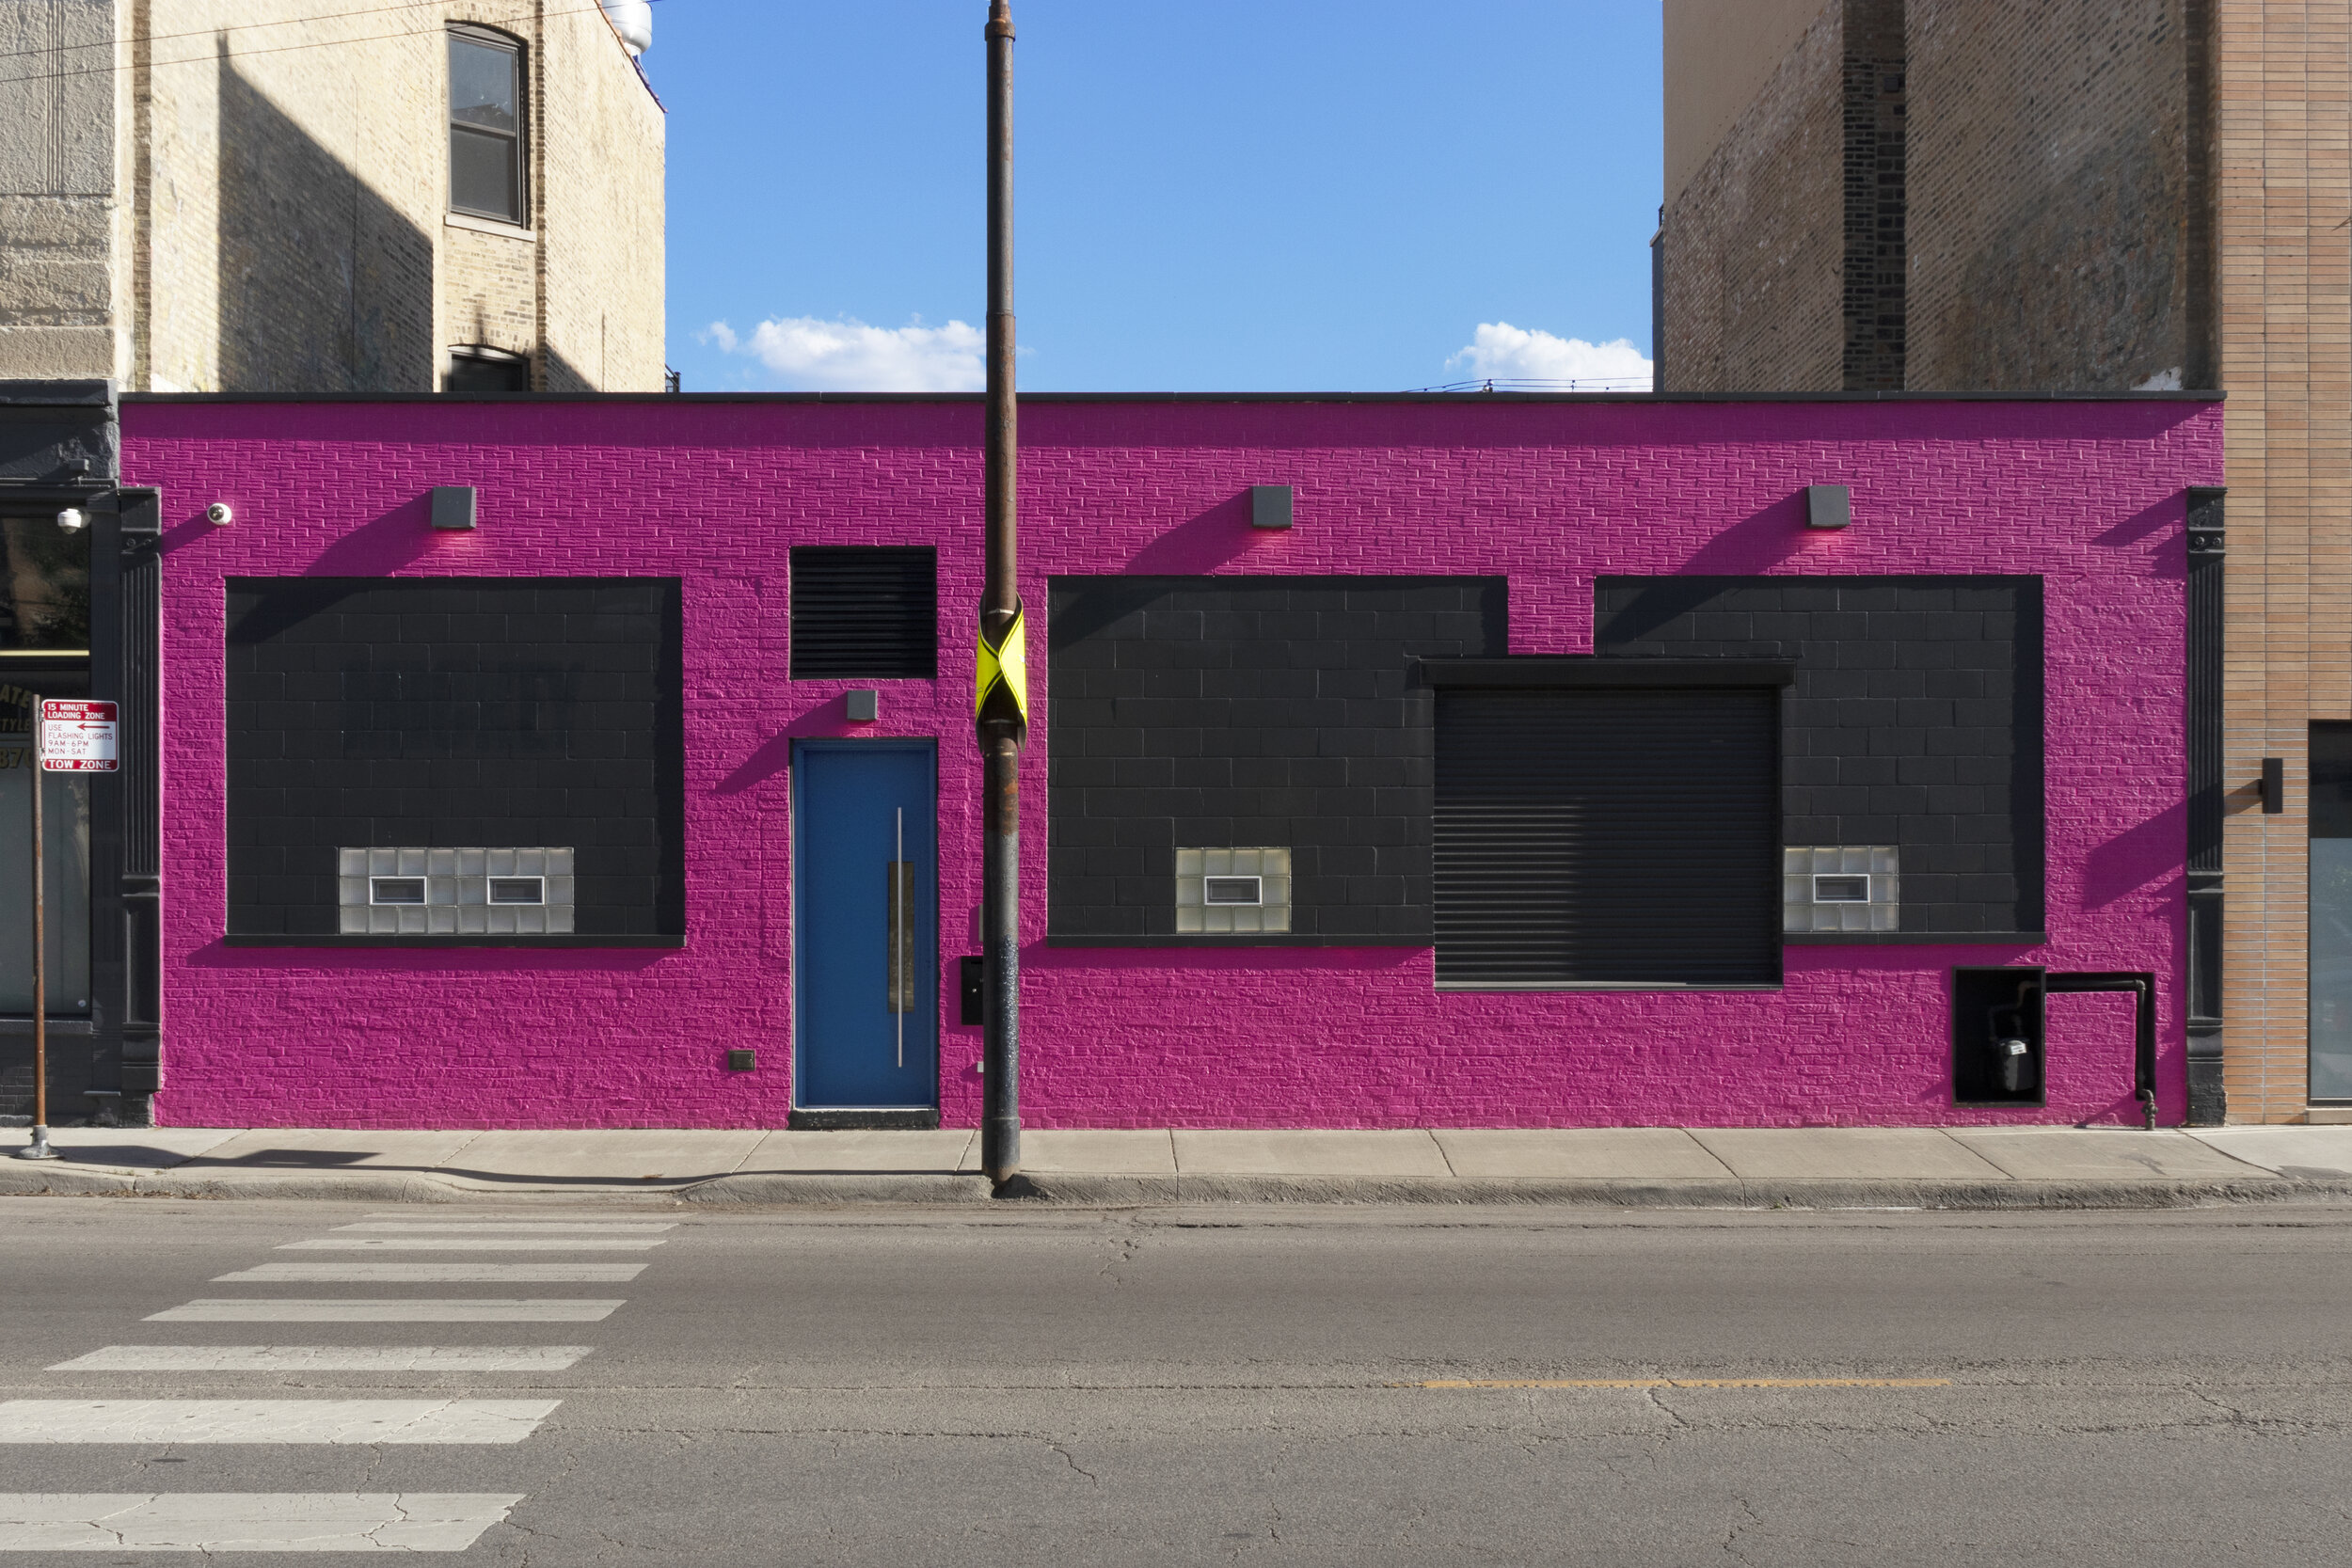   Bailey Connolly &amp; Isabelle Frances McGuire    1635 W Grand Ave , 2021  Enamel Exterior Paint (Beauty Queen)                                                               dimensions variable 